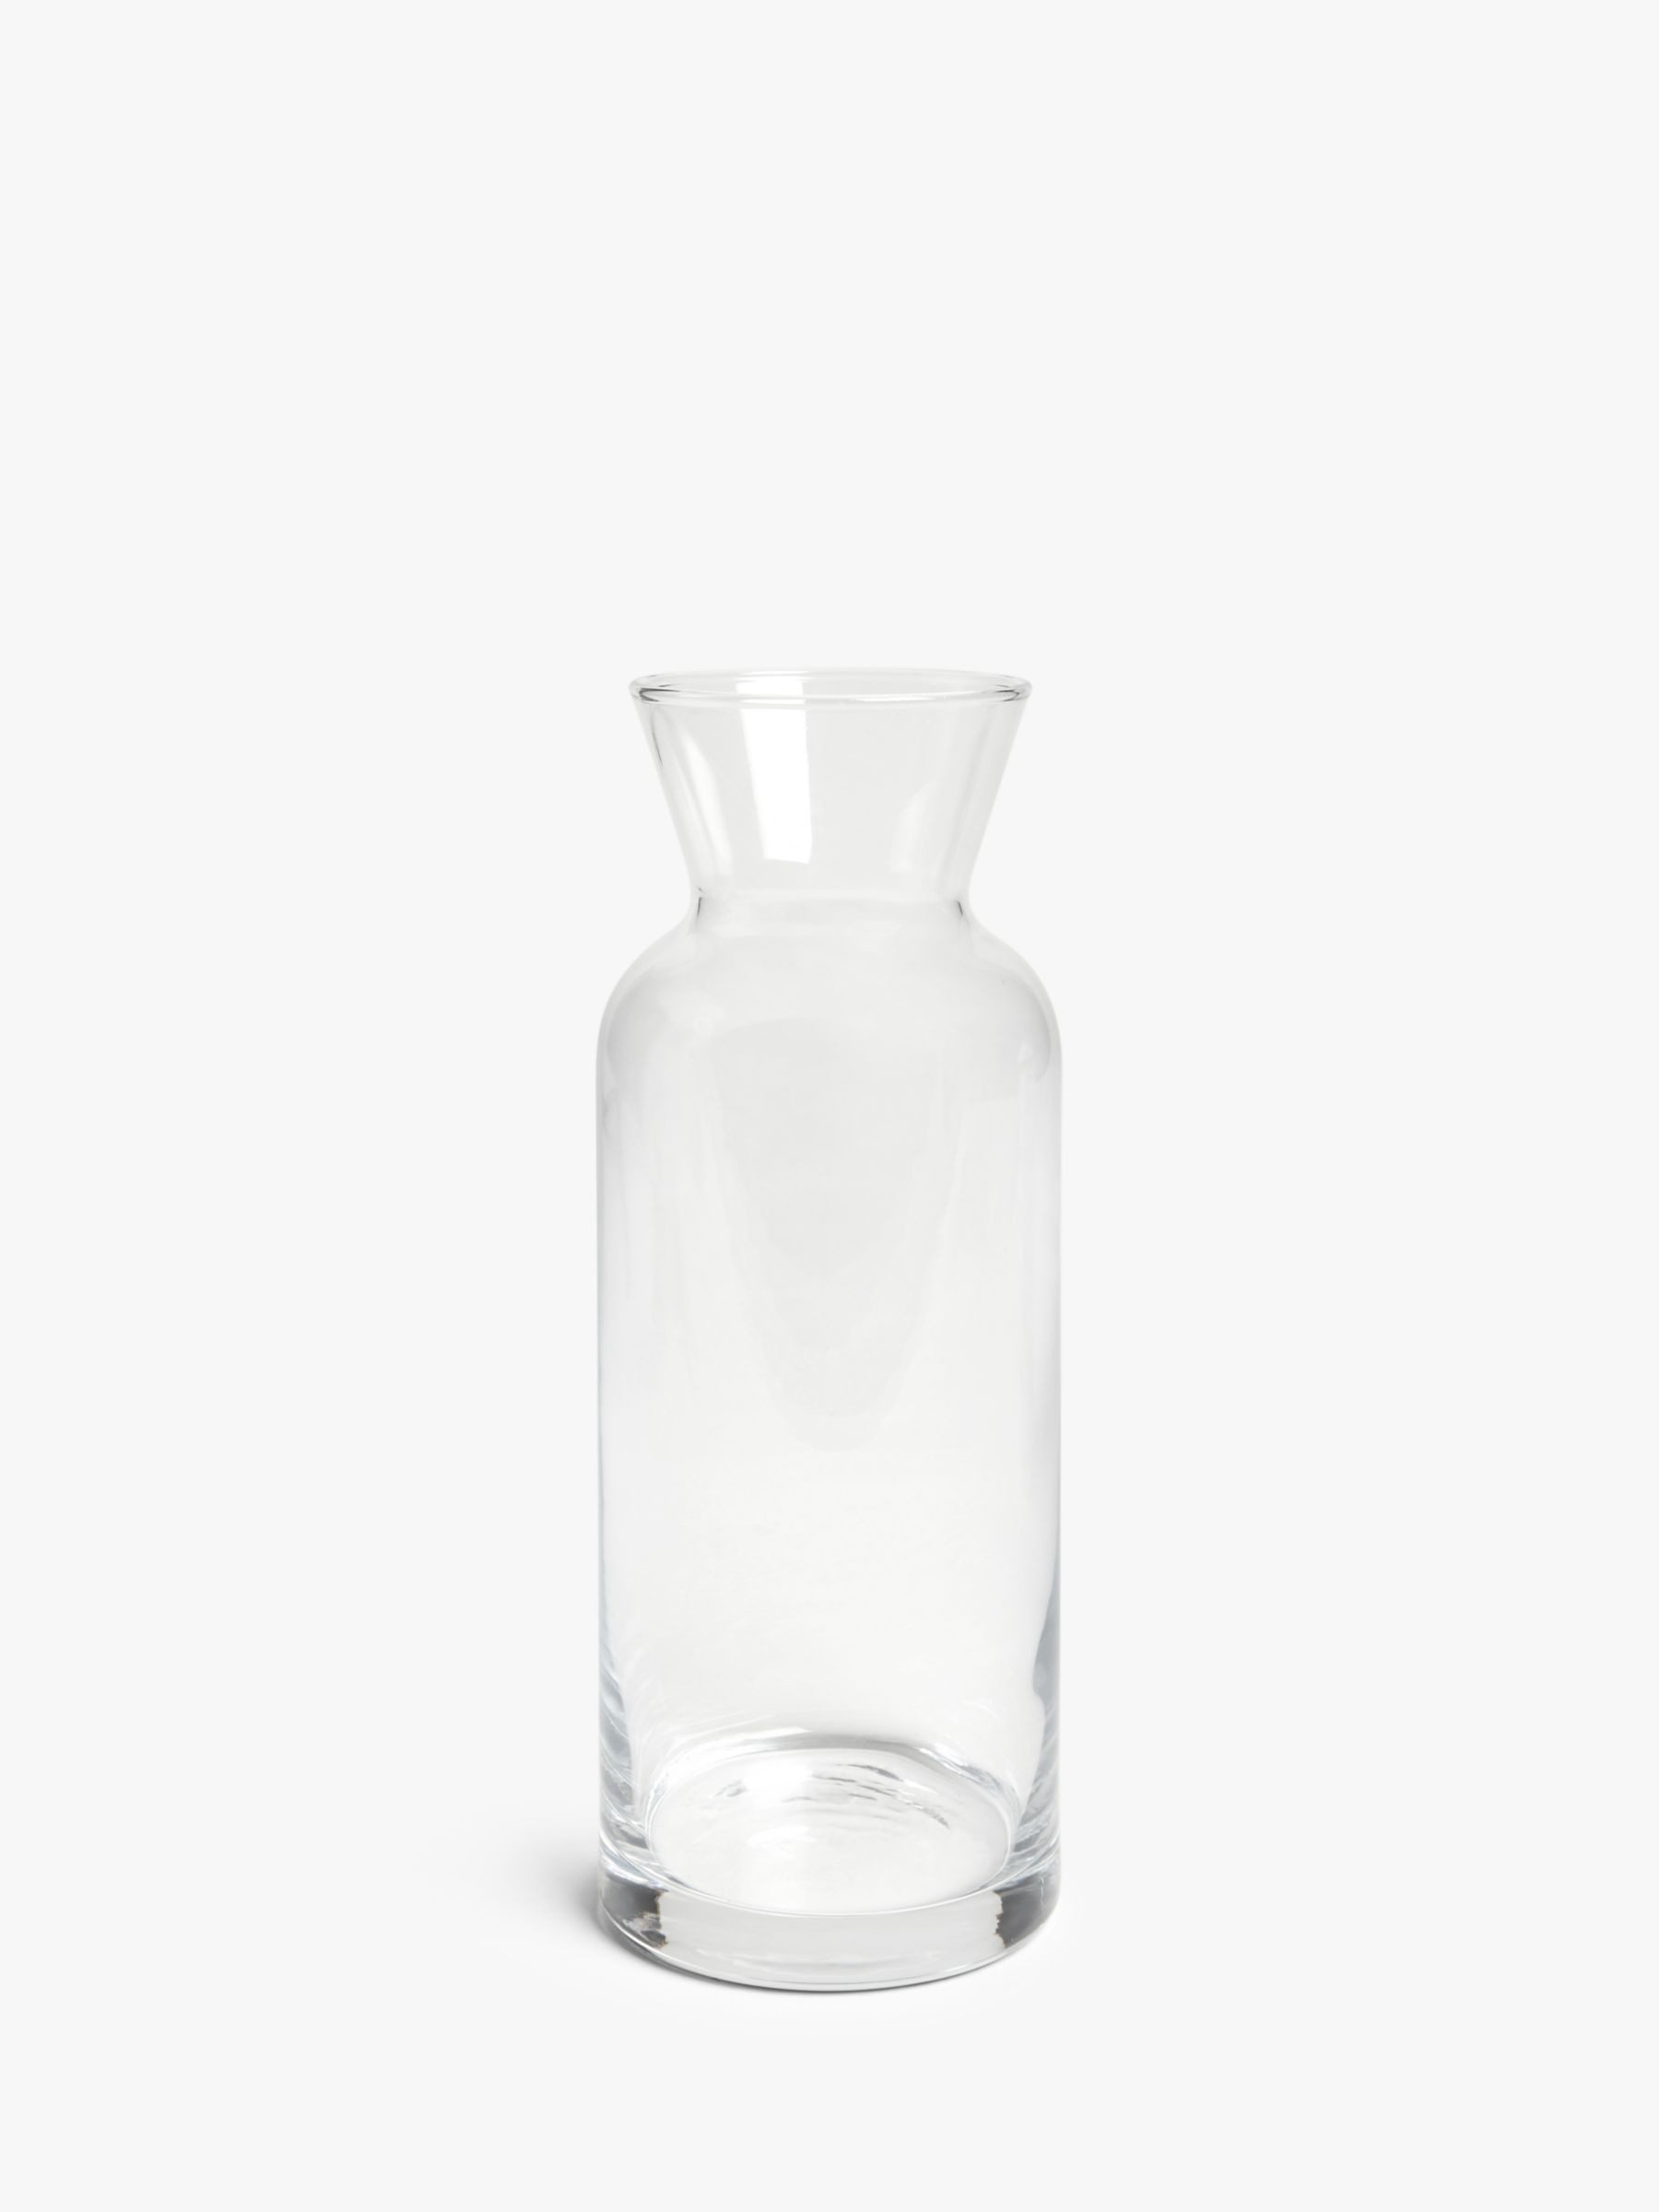 ANYDAY John Lewis & Partners Drink Glass Carafe, 1.3L, Clear